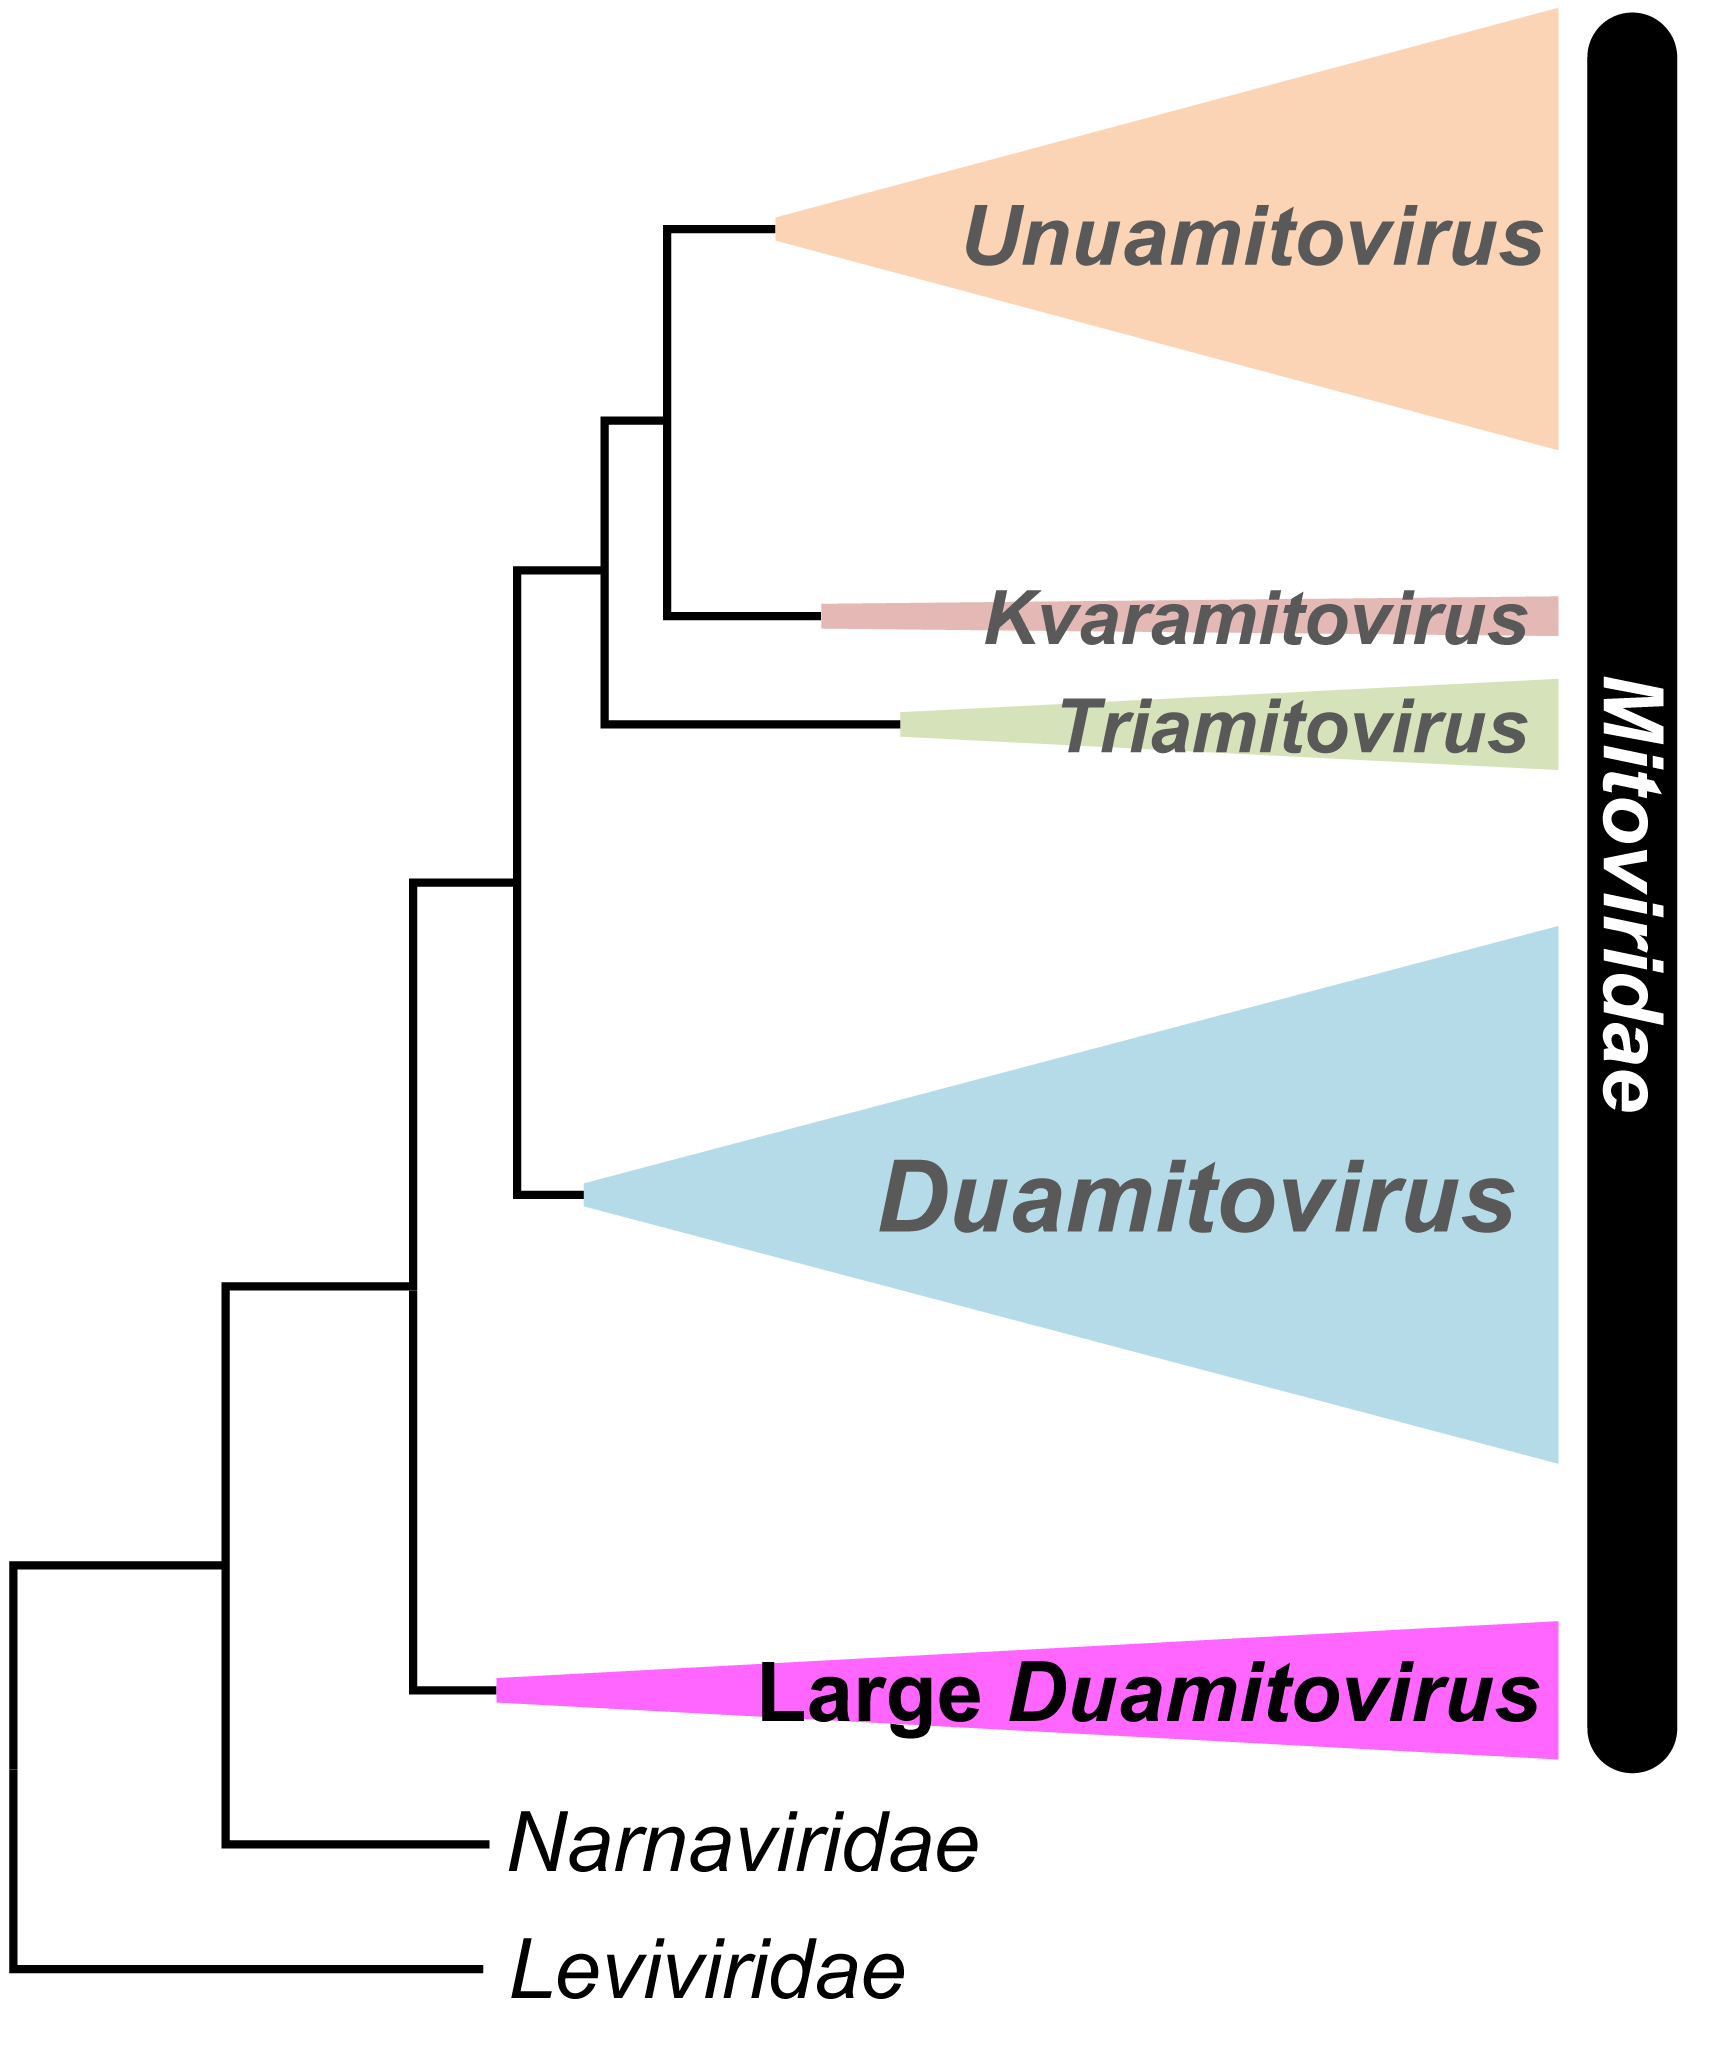 Phylogenetic analysis of the RNA-dependent RNA polymerase enzyme sequence shows that large duamitoviruses are the most ancestral group of mitoviruses (Tatsuhiro Ezawa).